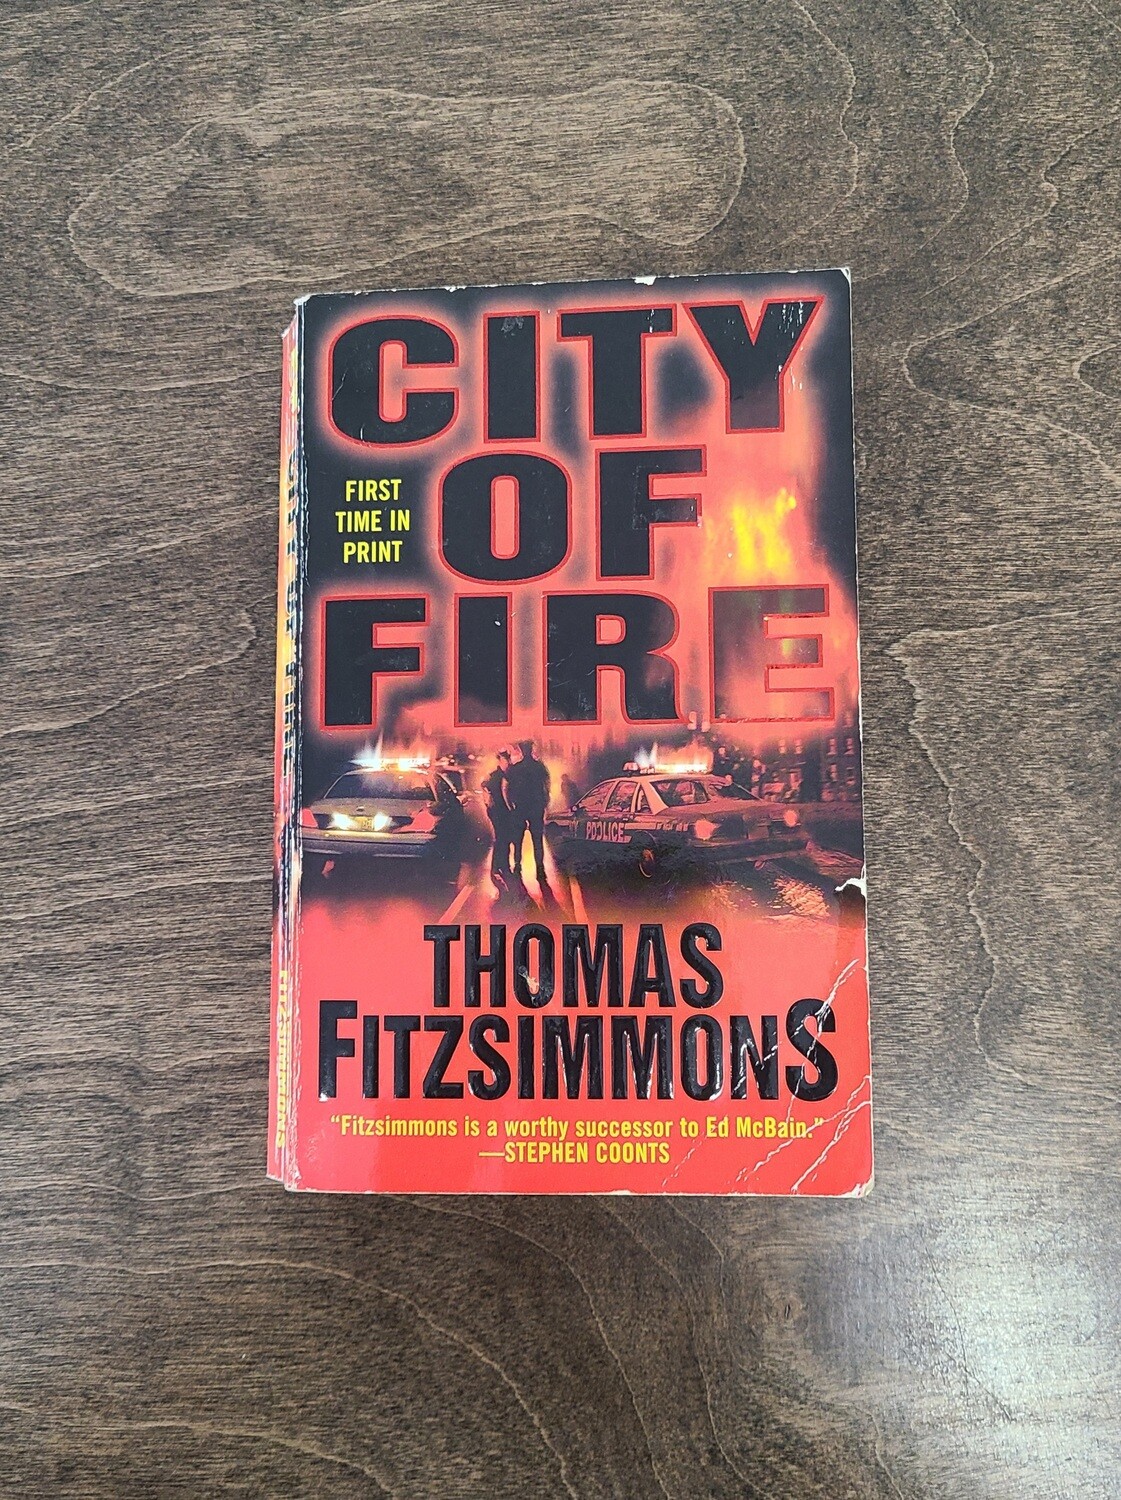 City of Fire by Thomas Fitzsimmons